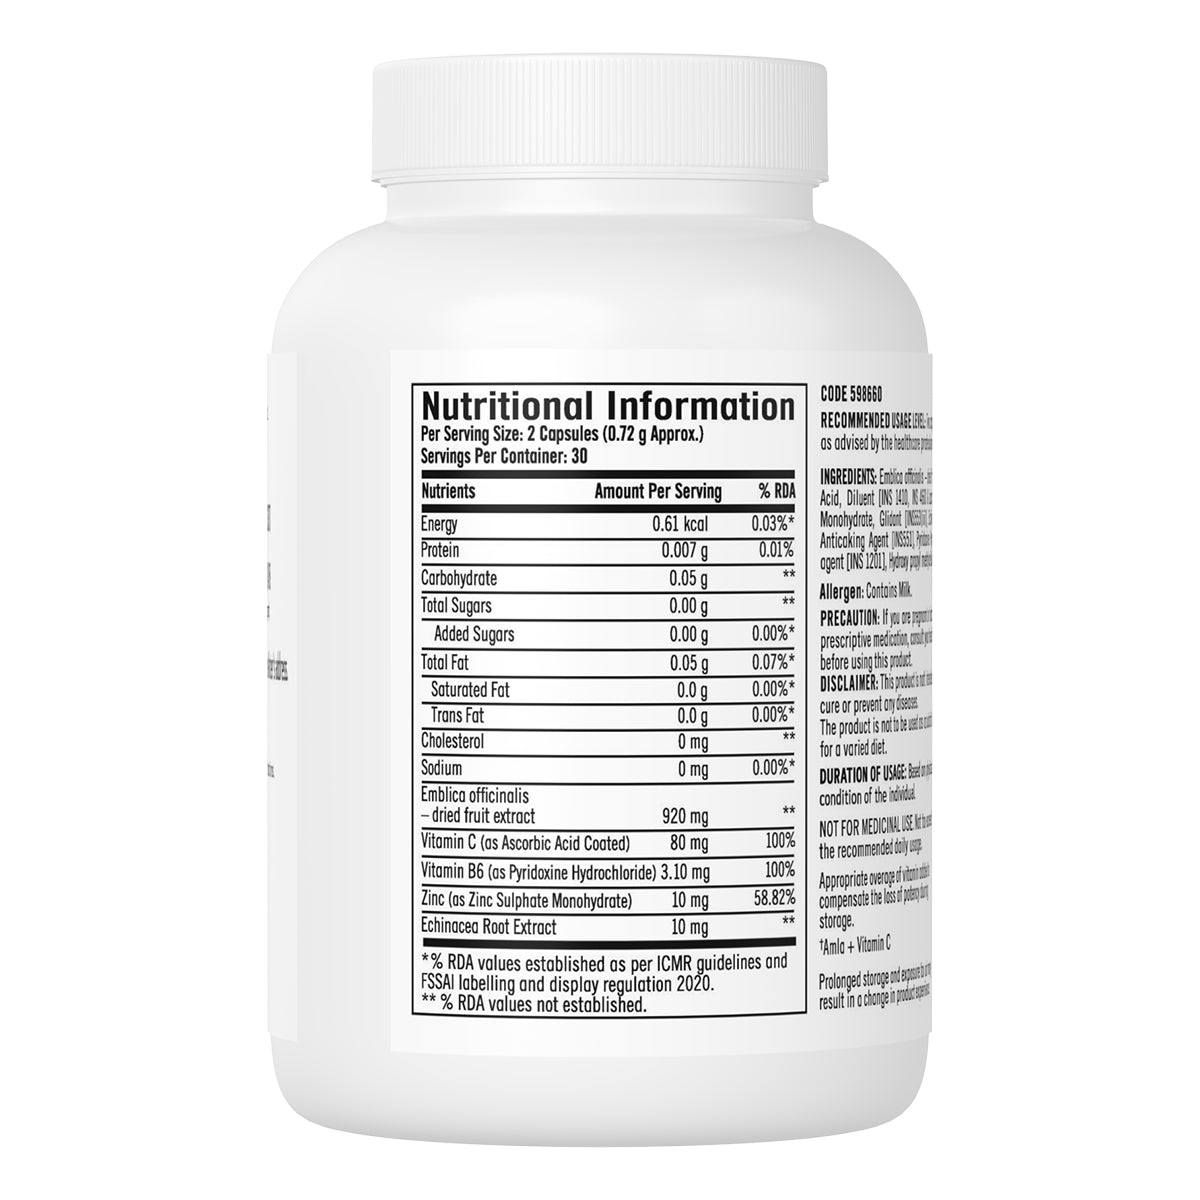 GNC Immune Formula - Protects Against Infections & Reduces Common Cold Risks